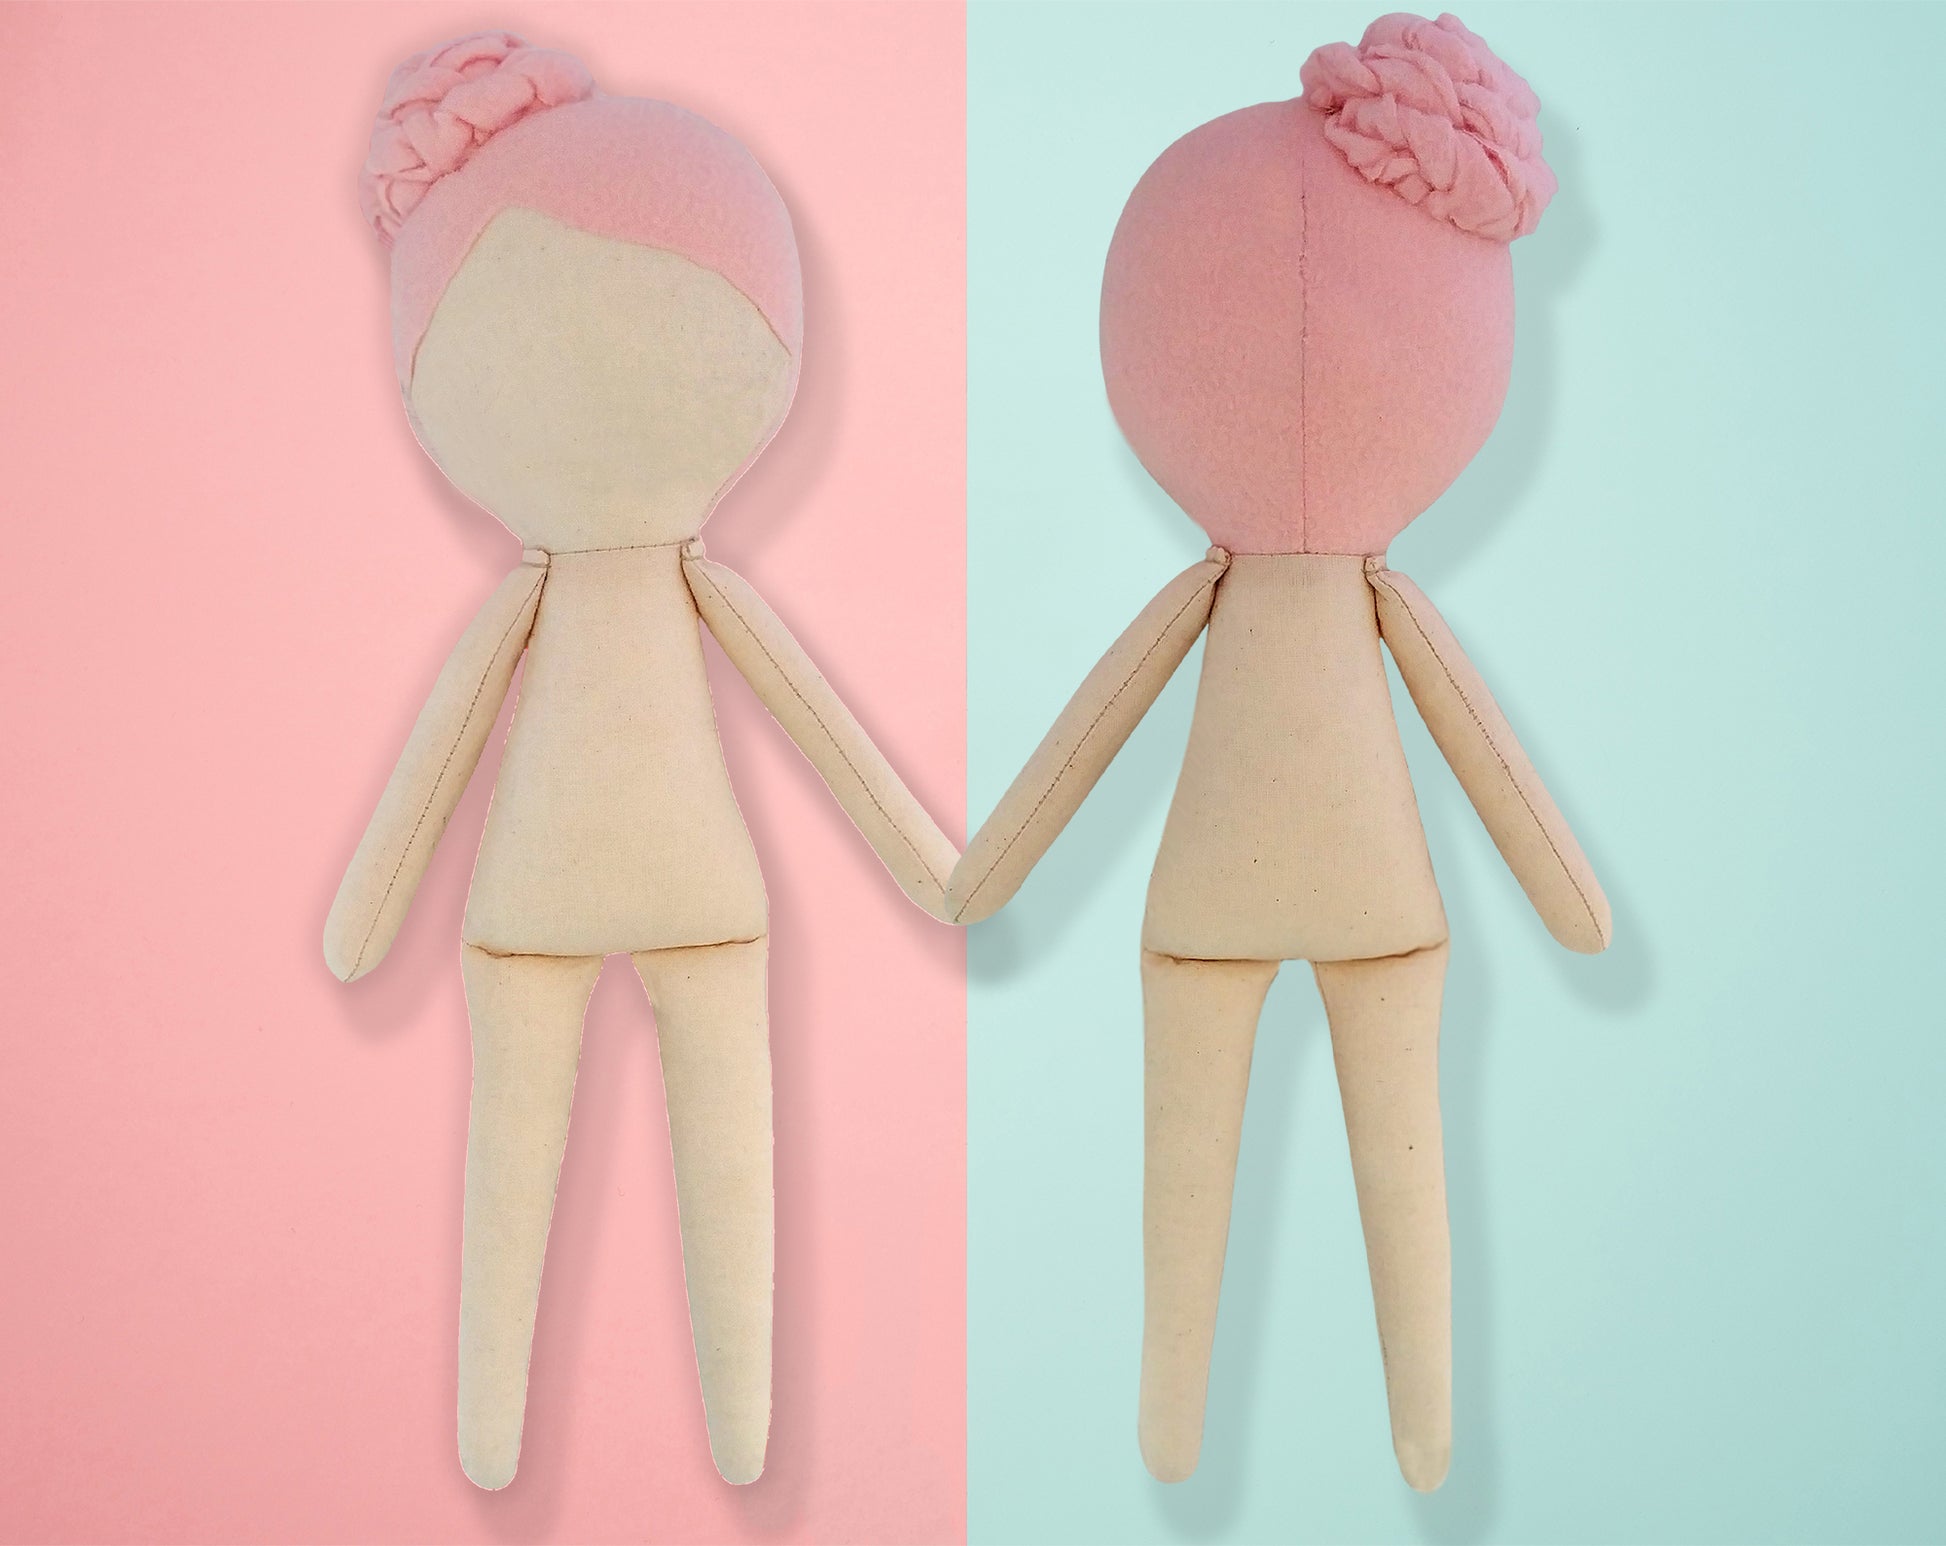 Doll Body 15 inch - PDF sewing pattern and tutorial – Petras